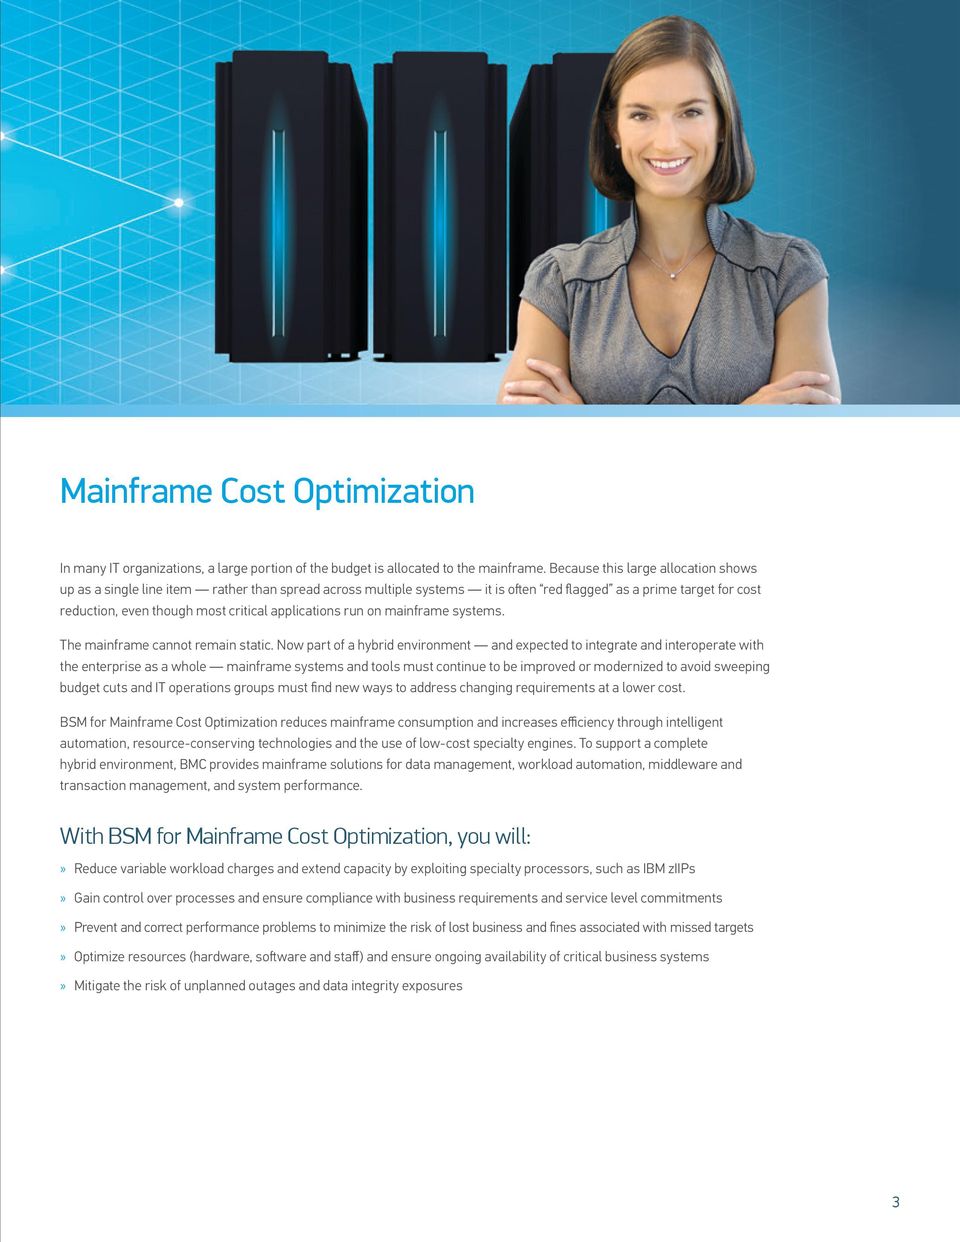 applications run on mainframe systems. The mainframe cannot remain static.